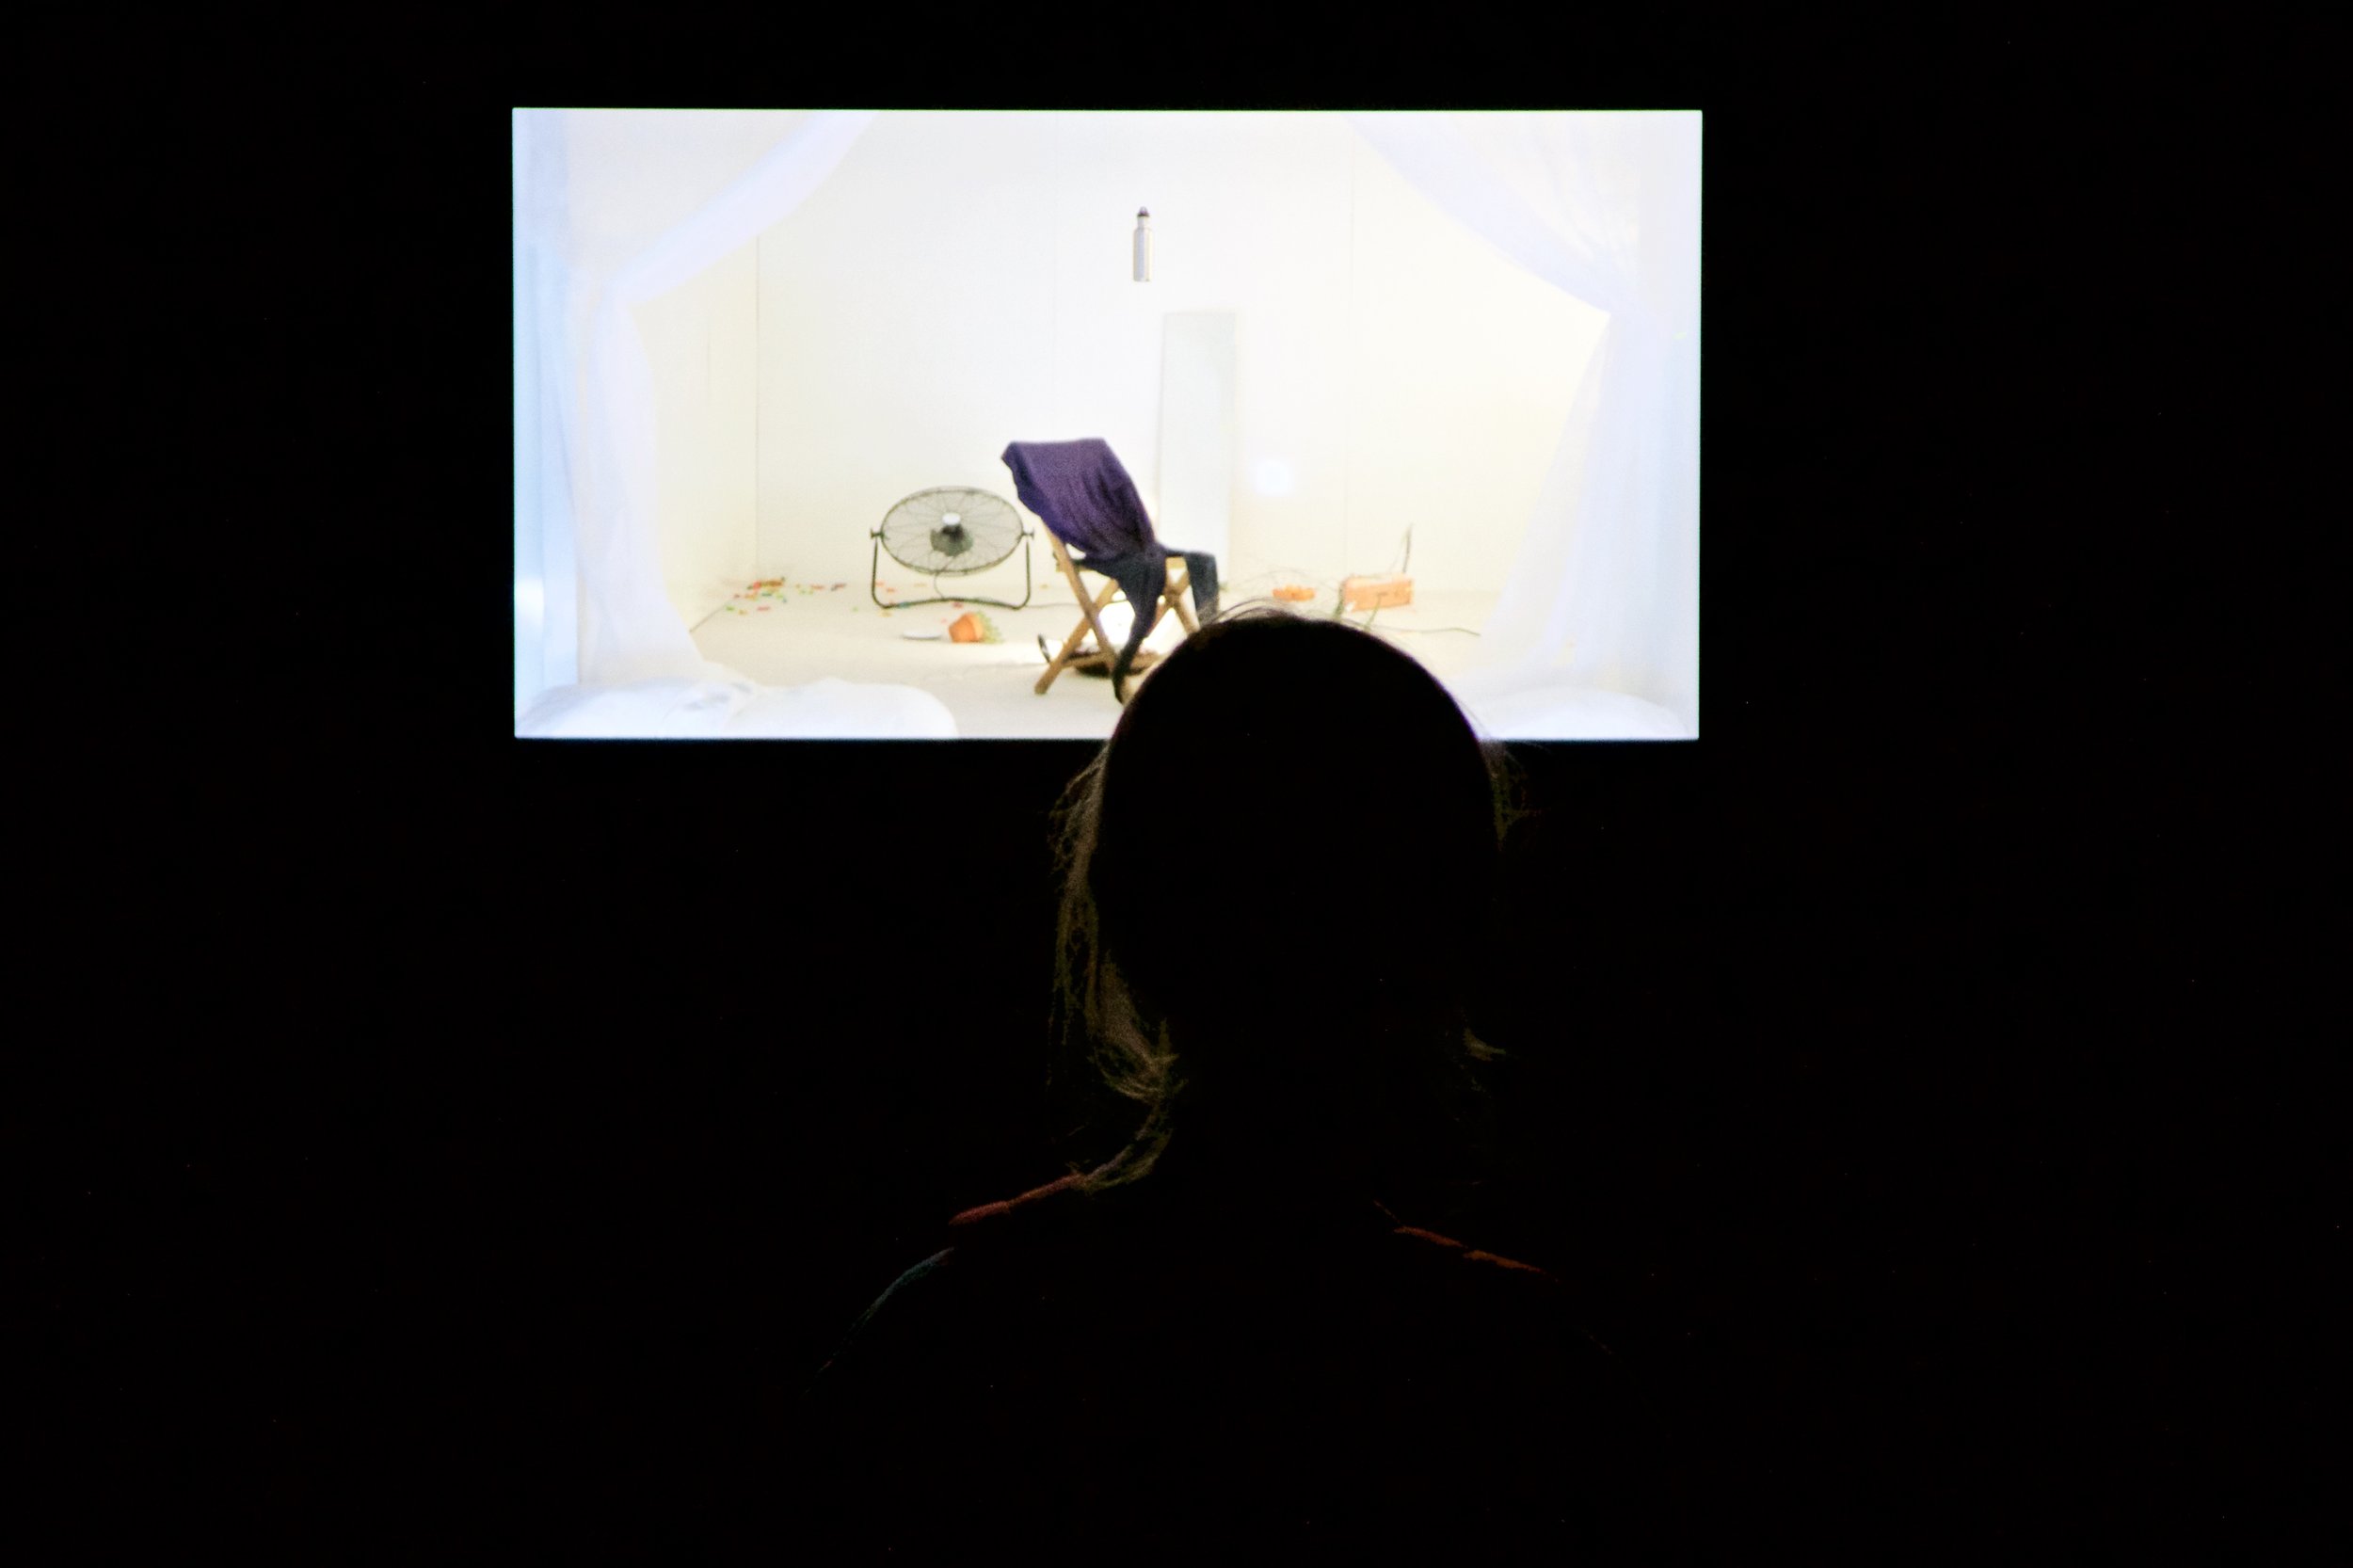 A person looks at a projected video (a chair and fan in white space framed by white curtains). Photo by Simon Courchel.